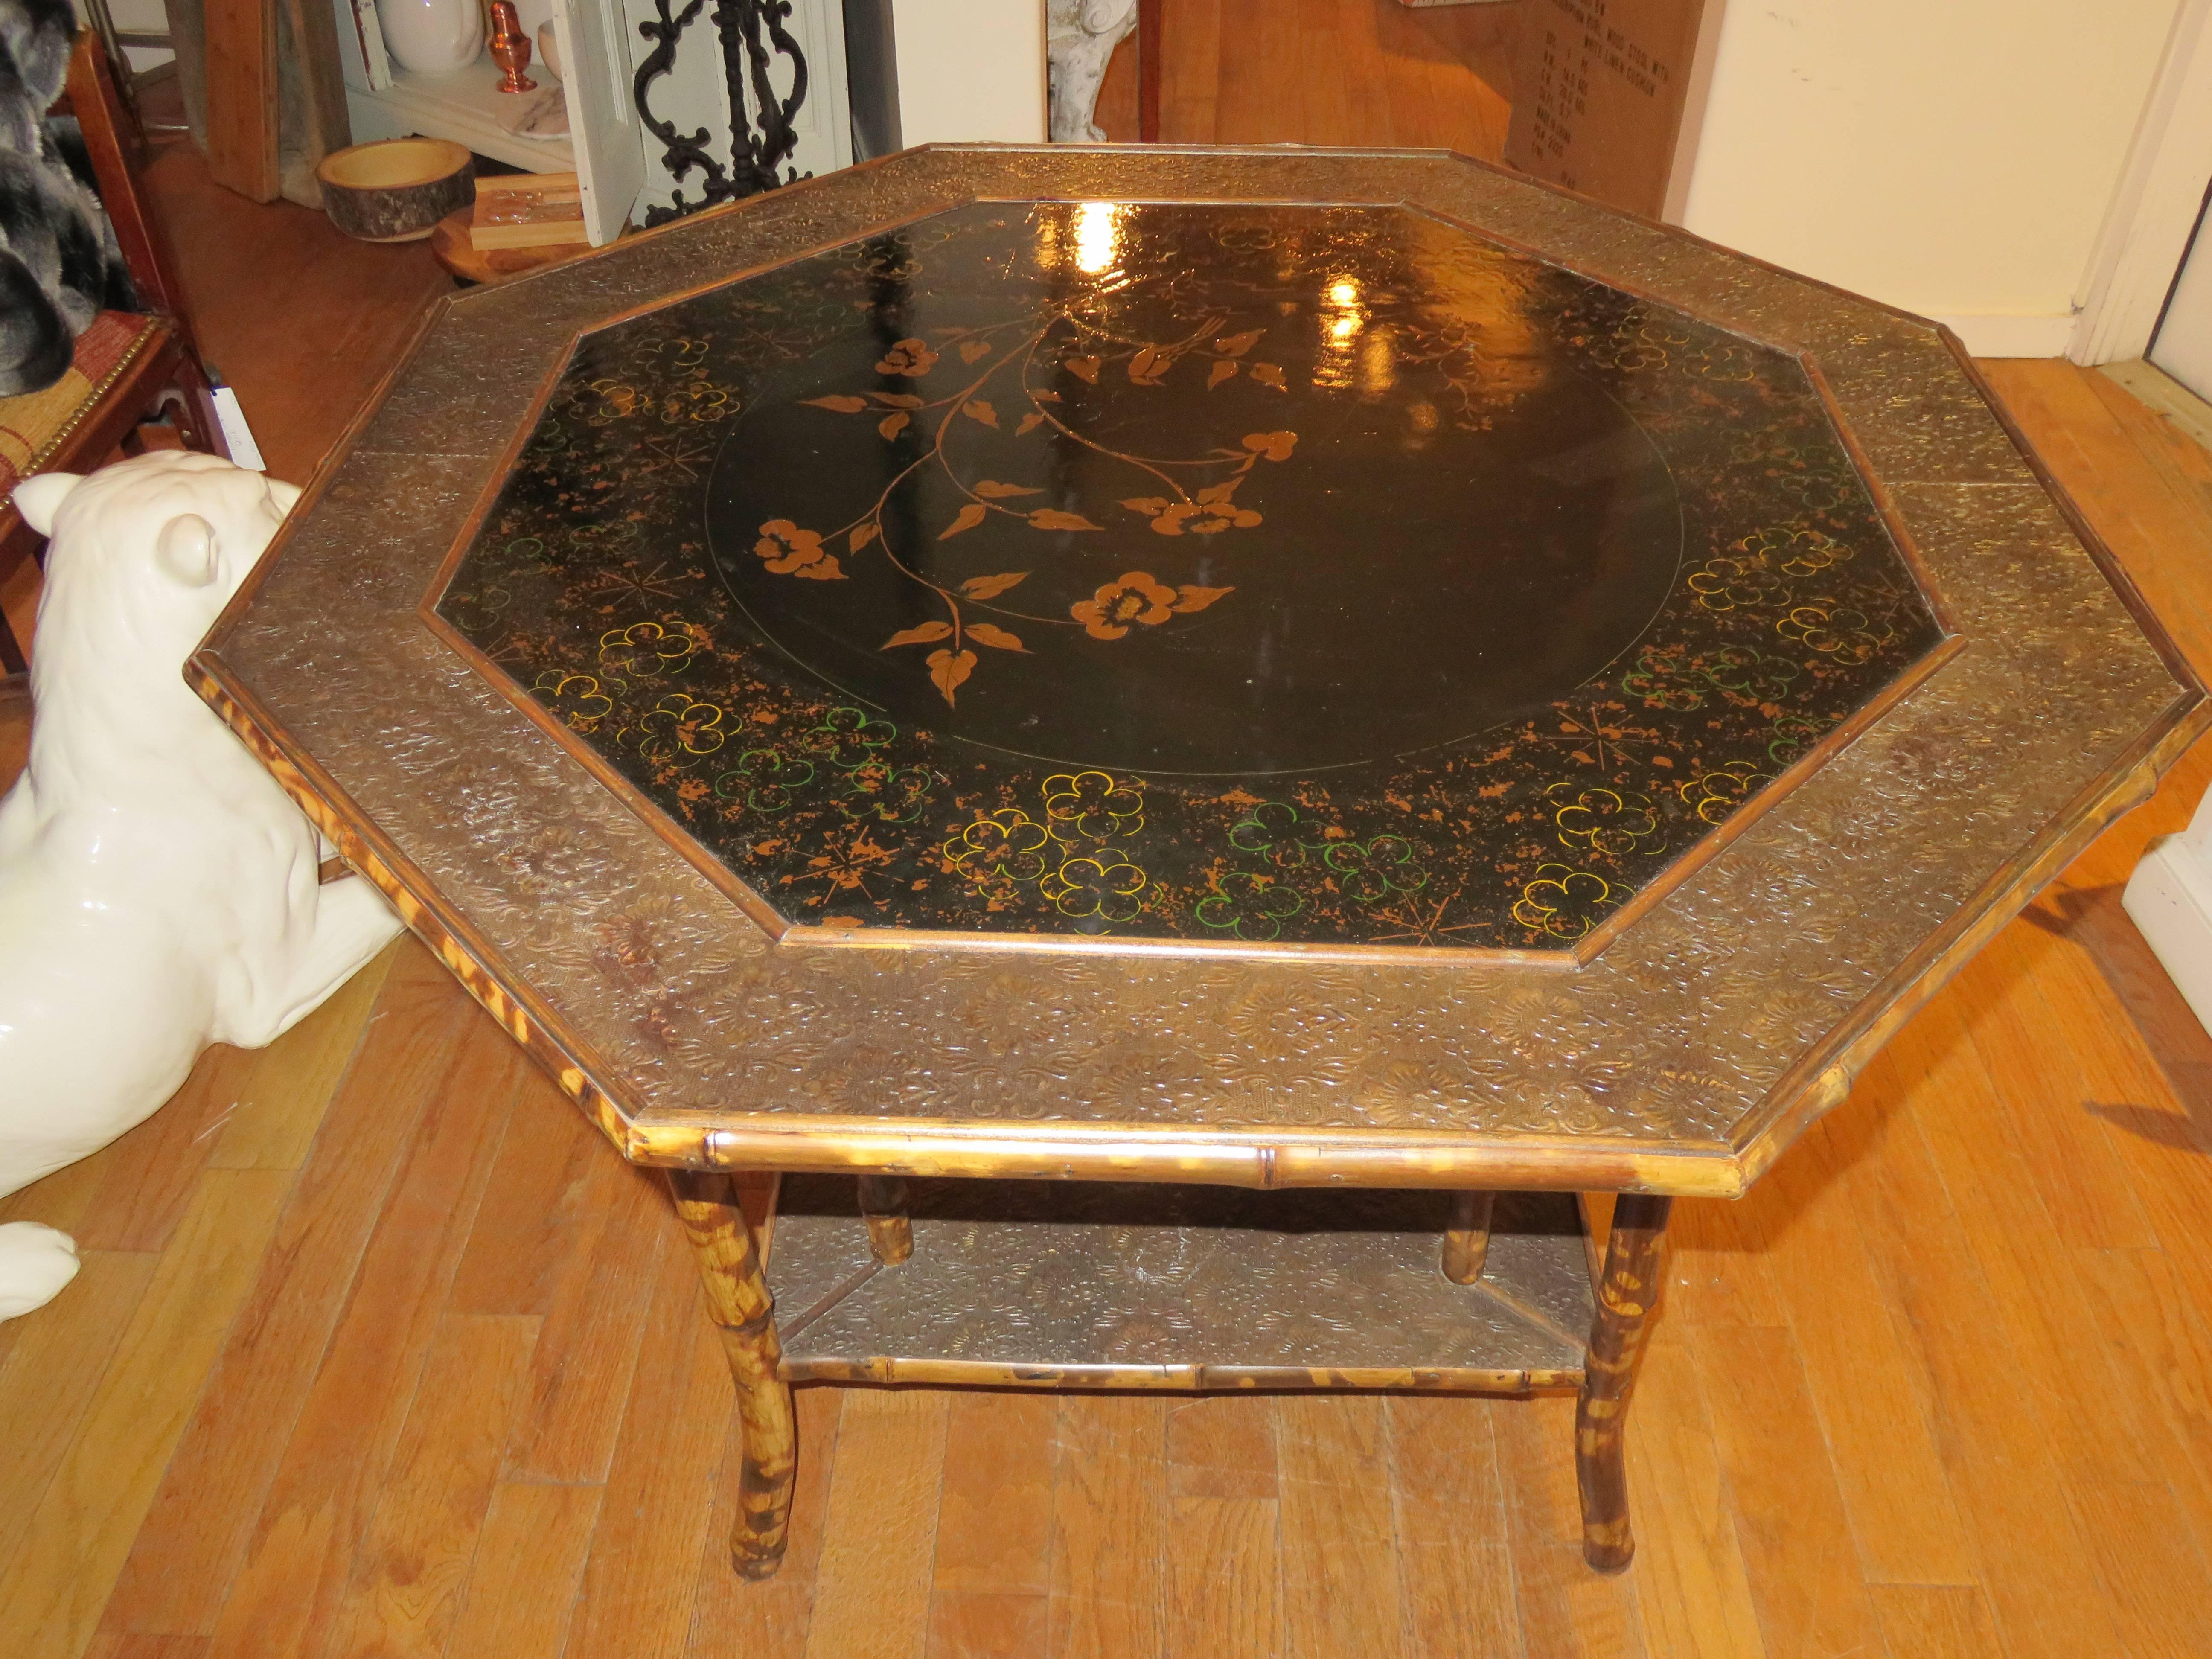 A late 19 century Anglo-Indian/British colonial octagon shaped center table. With a beautiful chinoiserie top. A stamped leather trim on top and bottom level.
 Faux tortoiseshell bamboo frame, lovely condition considering the age.